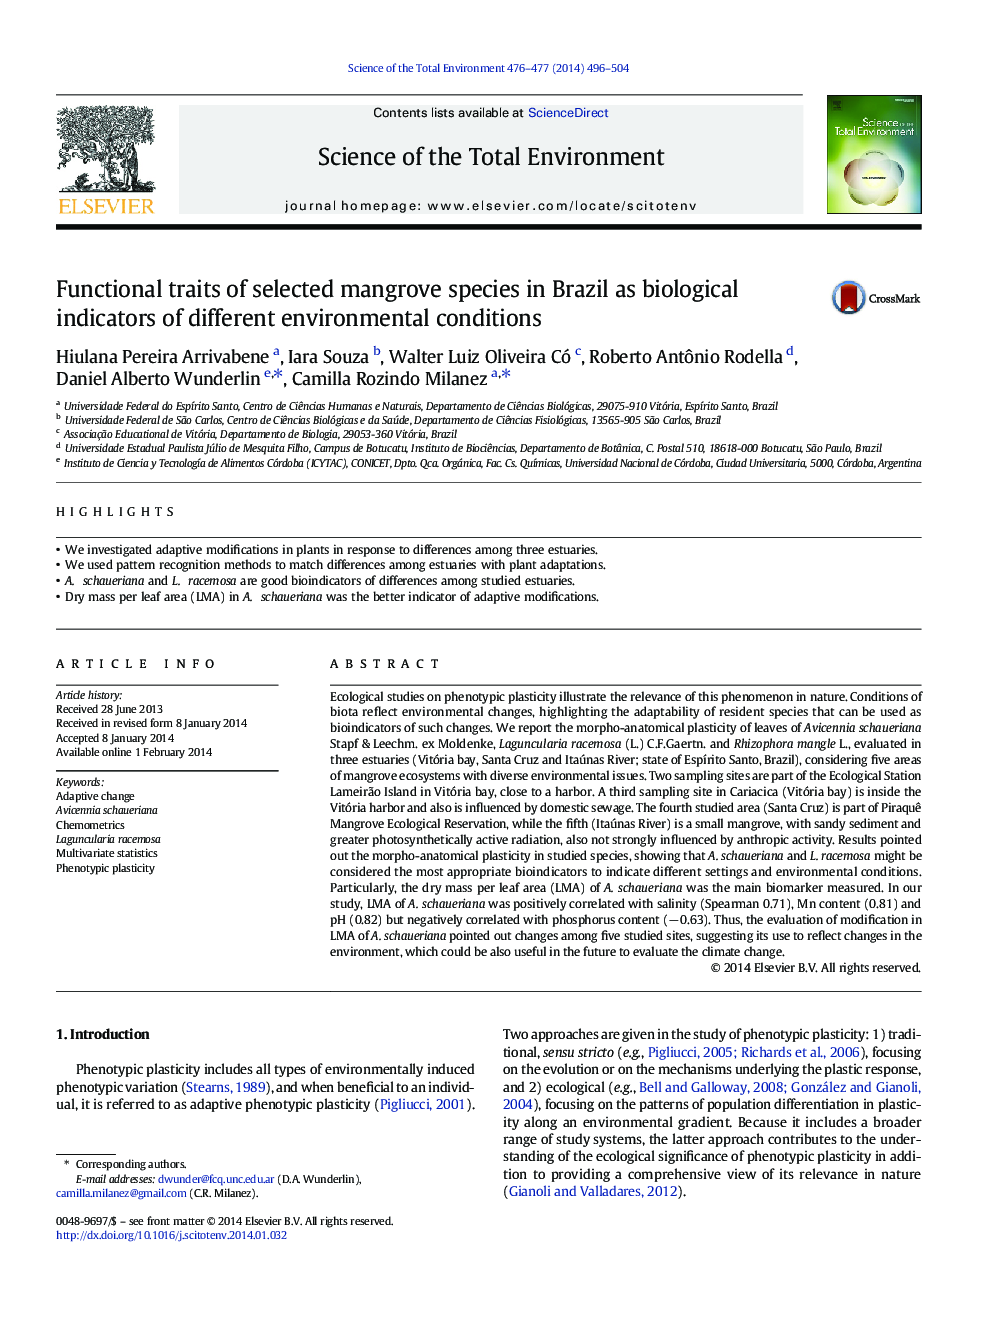 Functional traits of selected mangrove species in Brazil as biological indicators of different environmental conditions